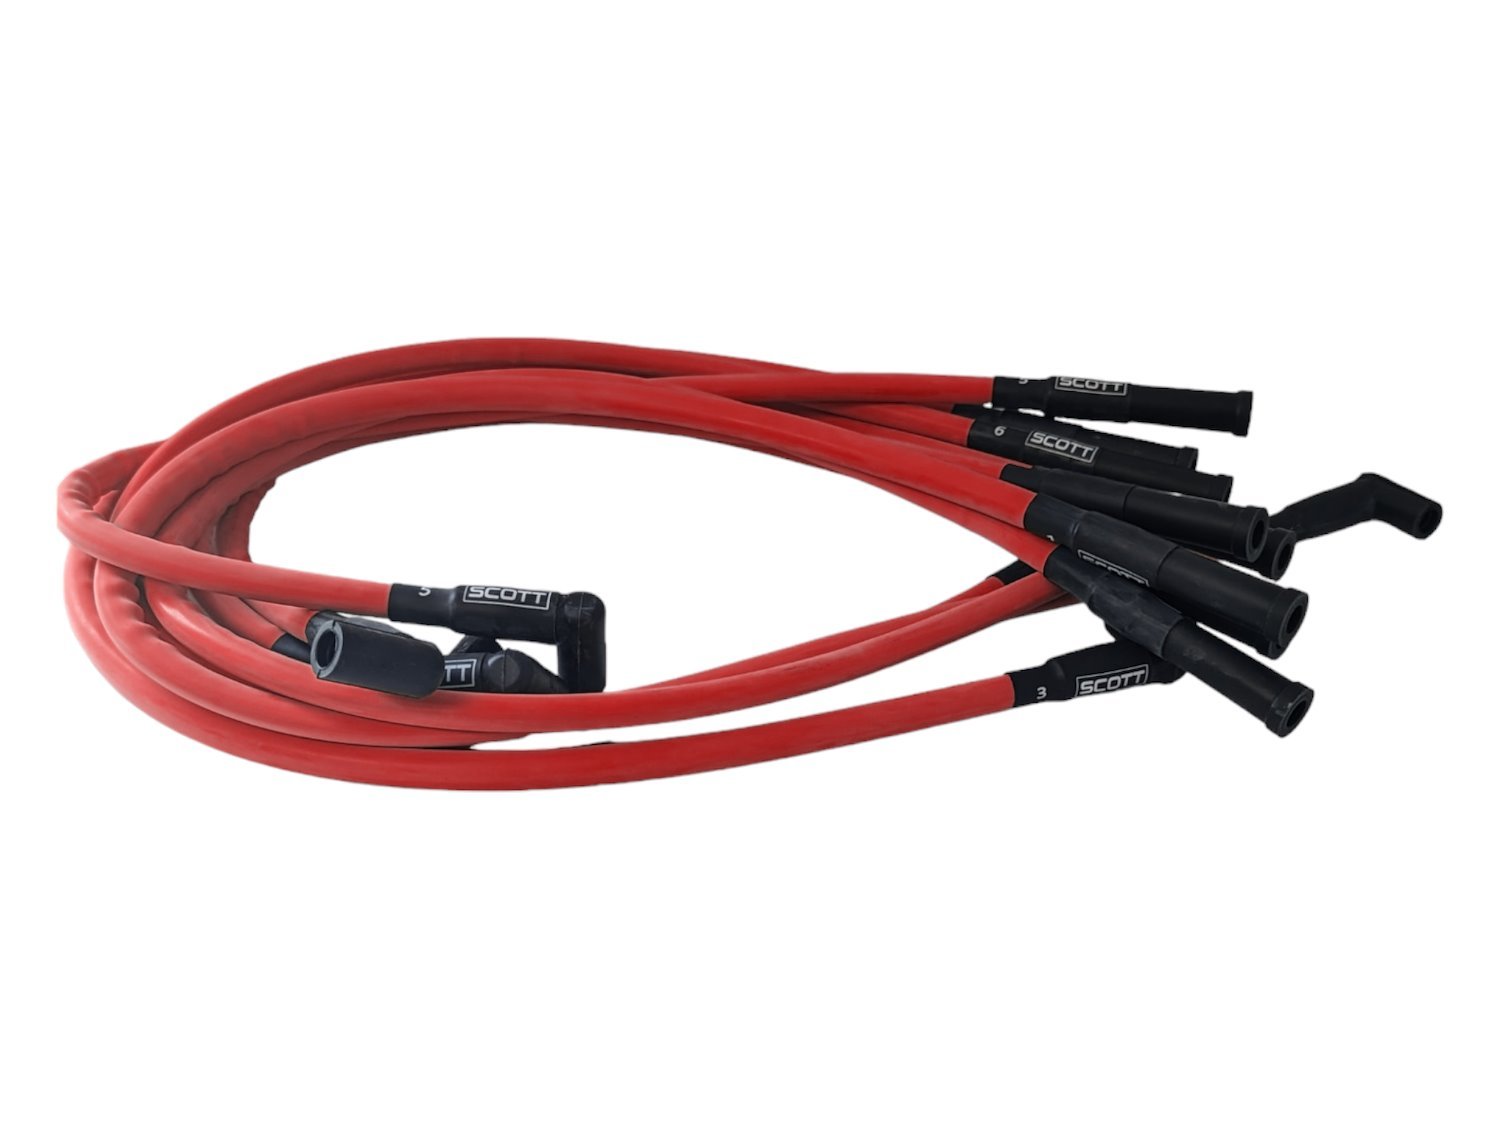 SPW-CH-421-2 High-Performance Silicone-Sleeved Spark Plug Wire Set for Small Block Chevy, Over Valve Cover [Red]